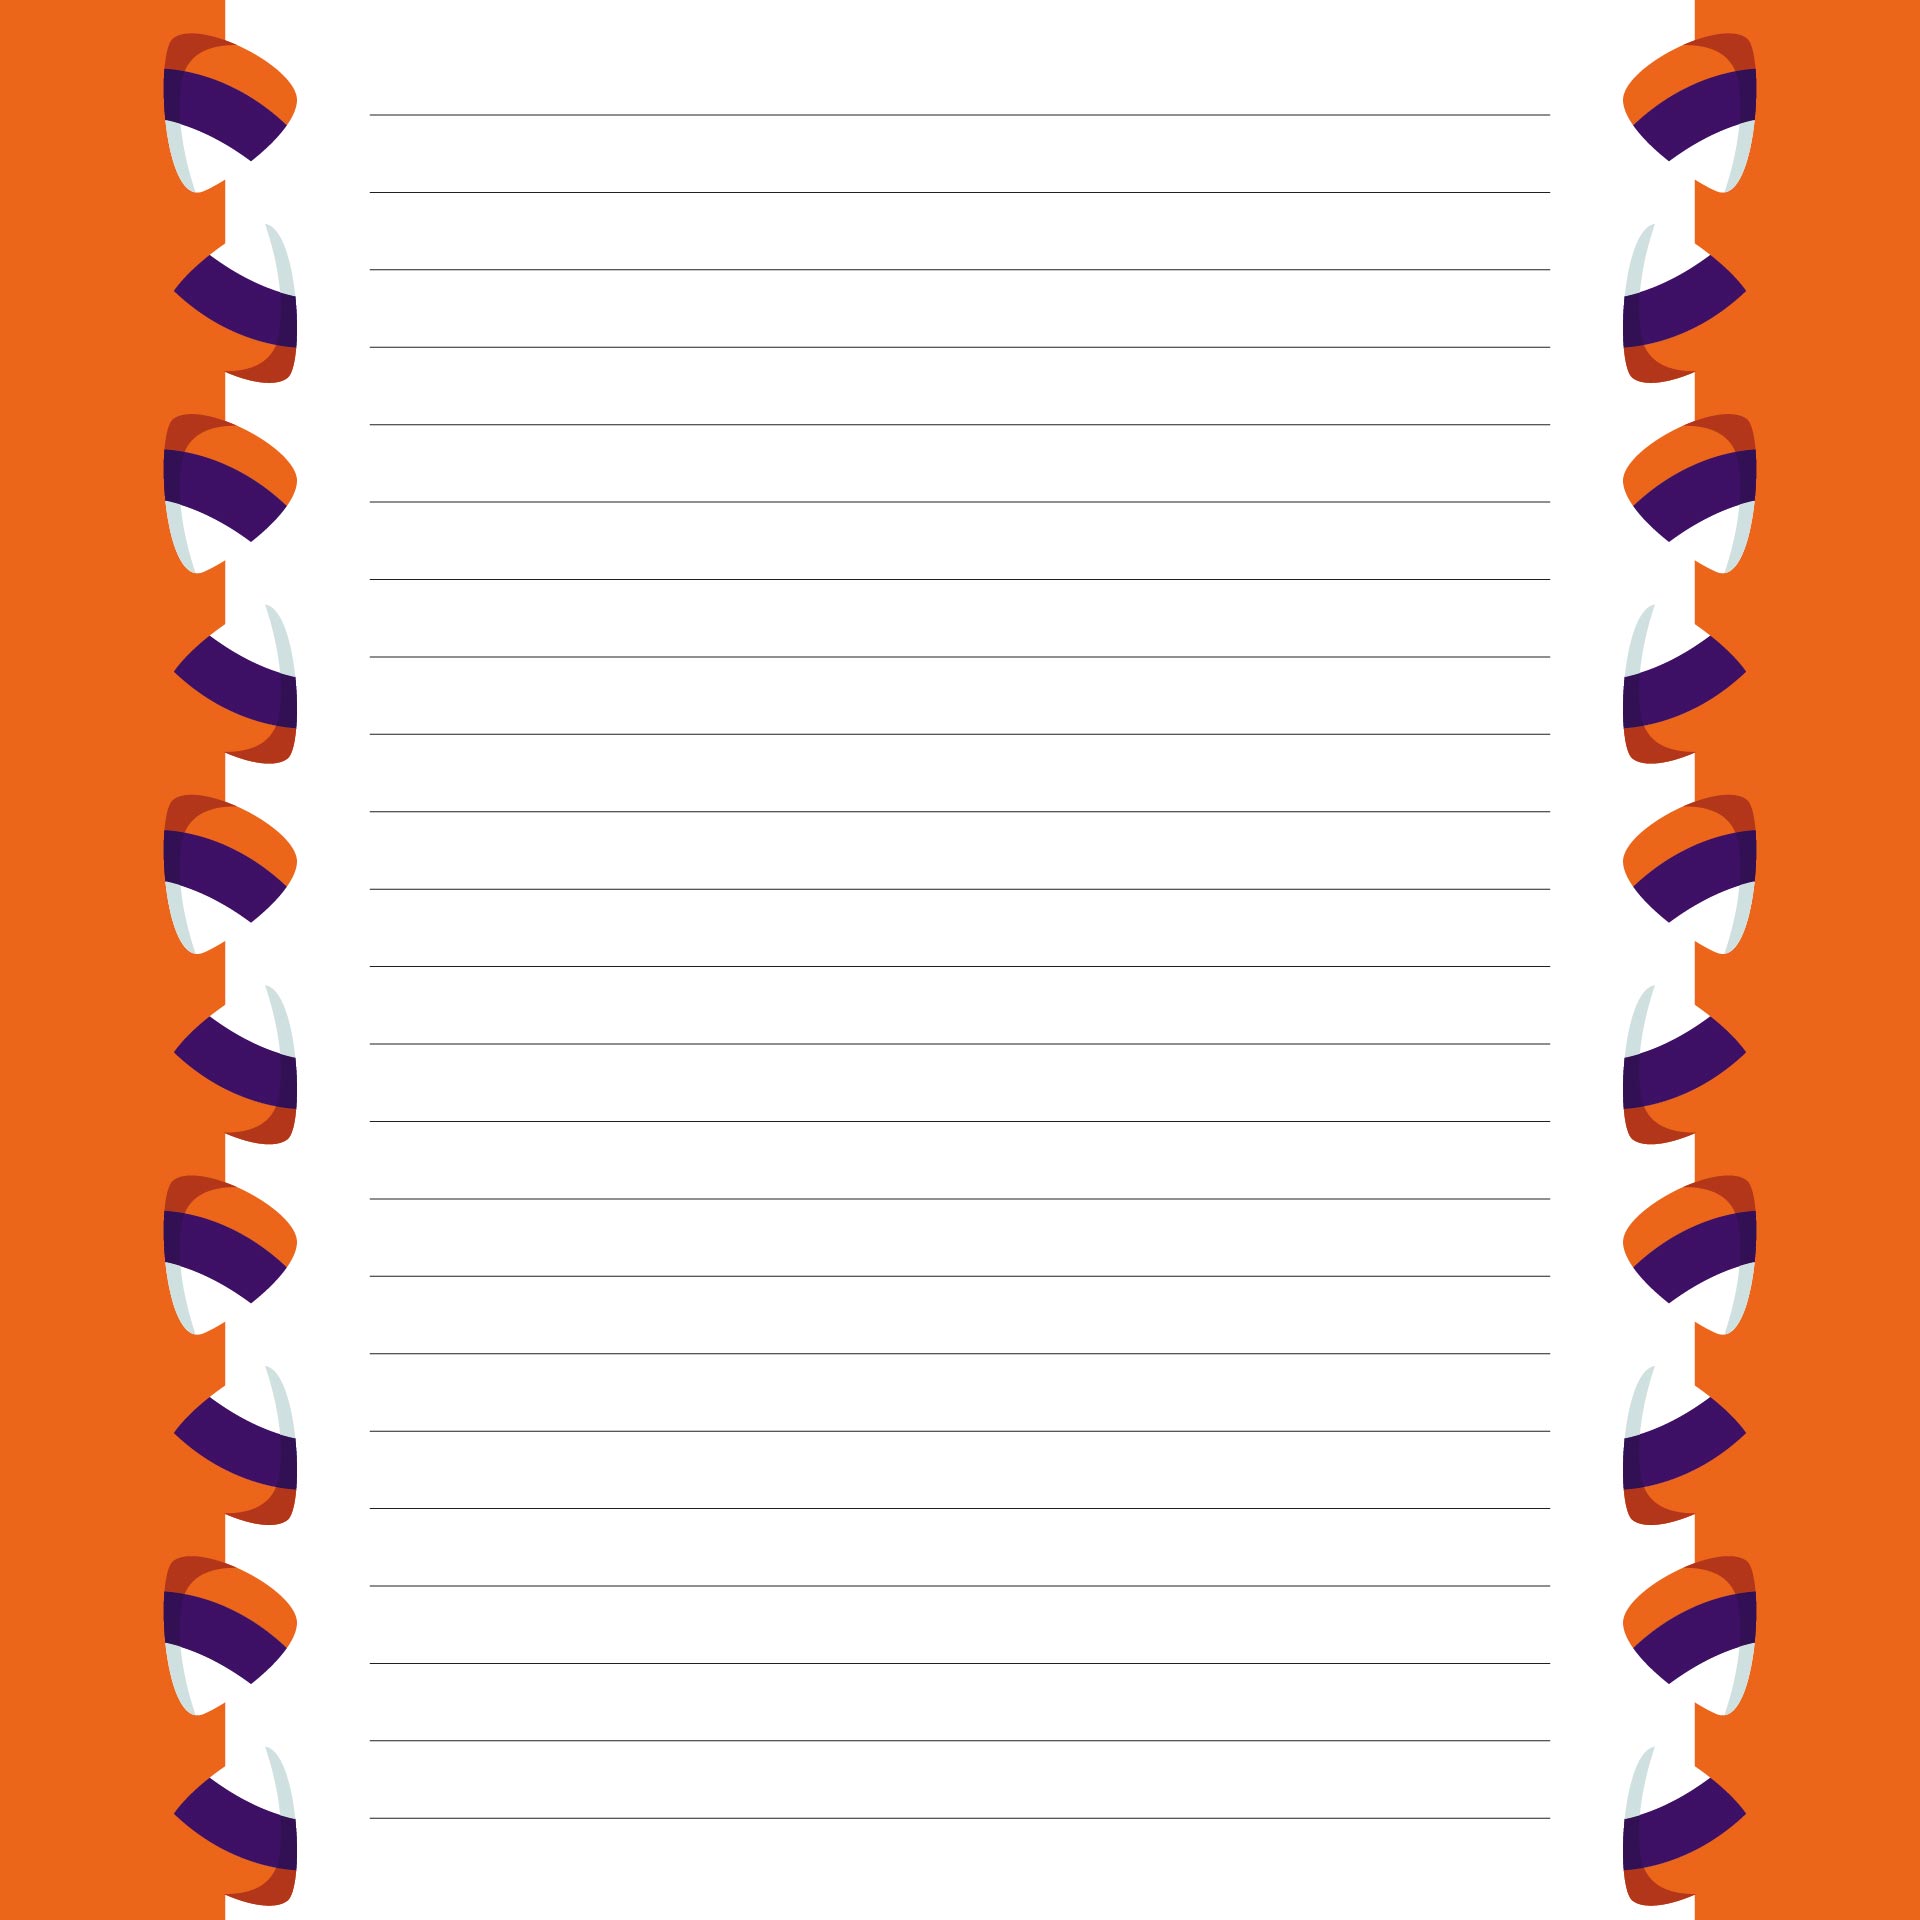 Printable Halloween Lined Writing Paper